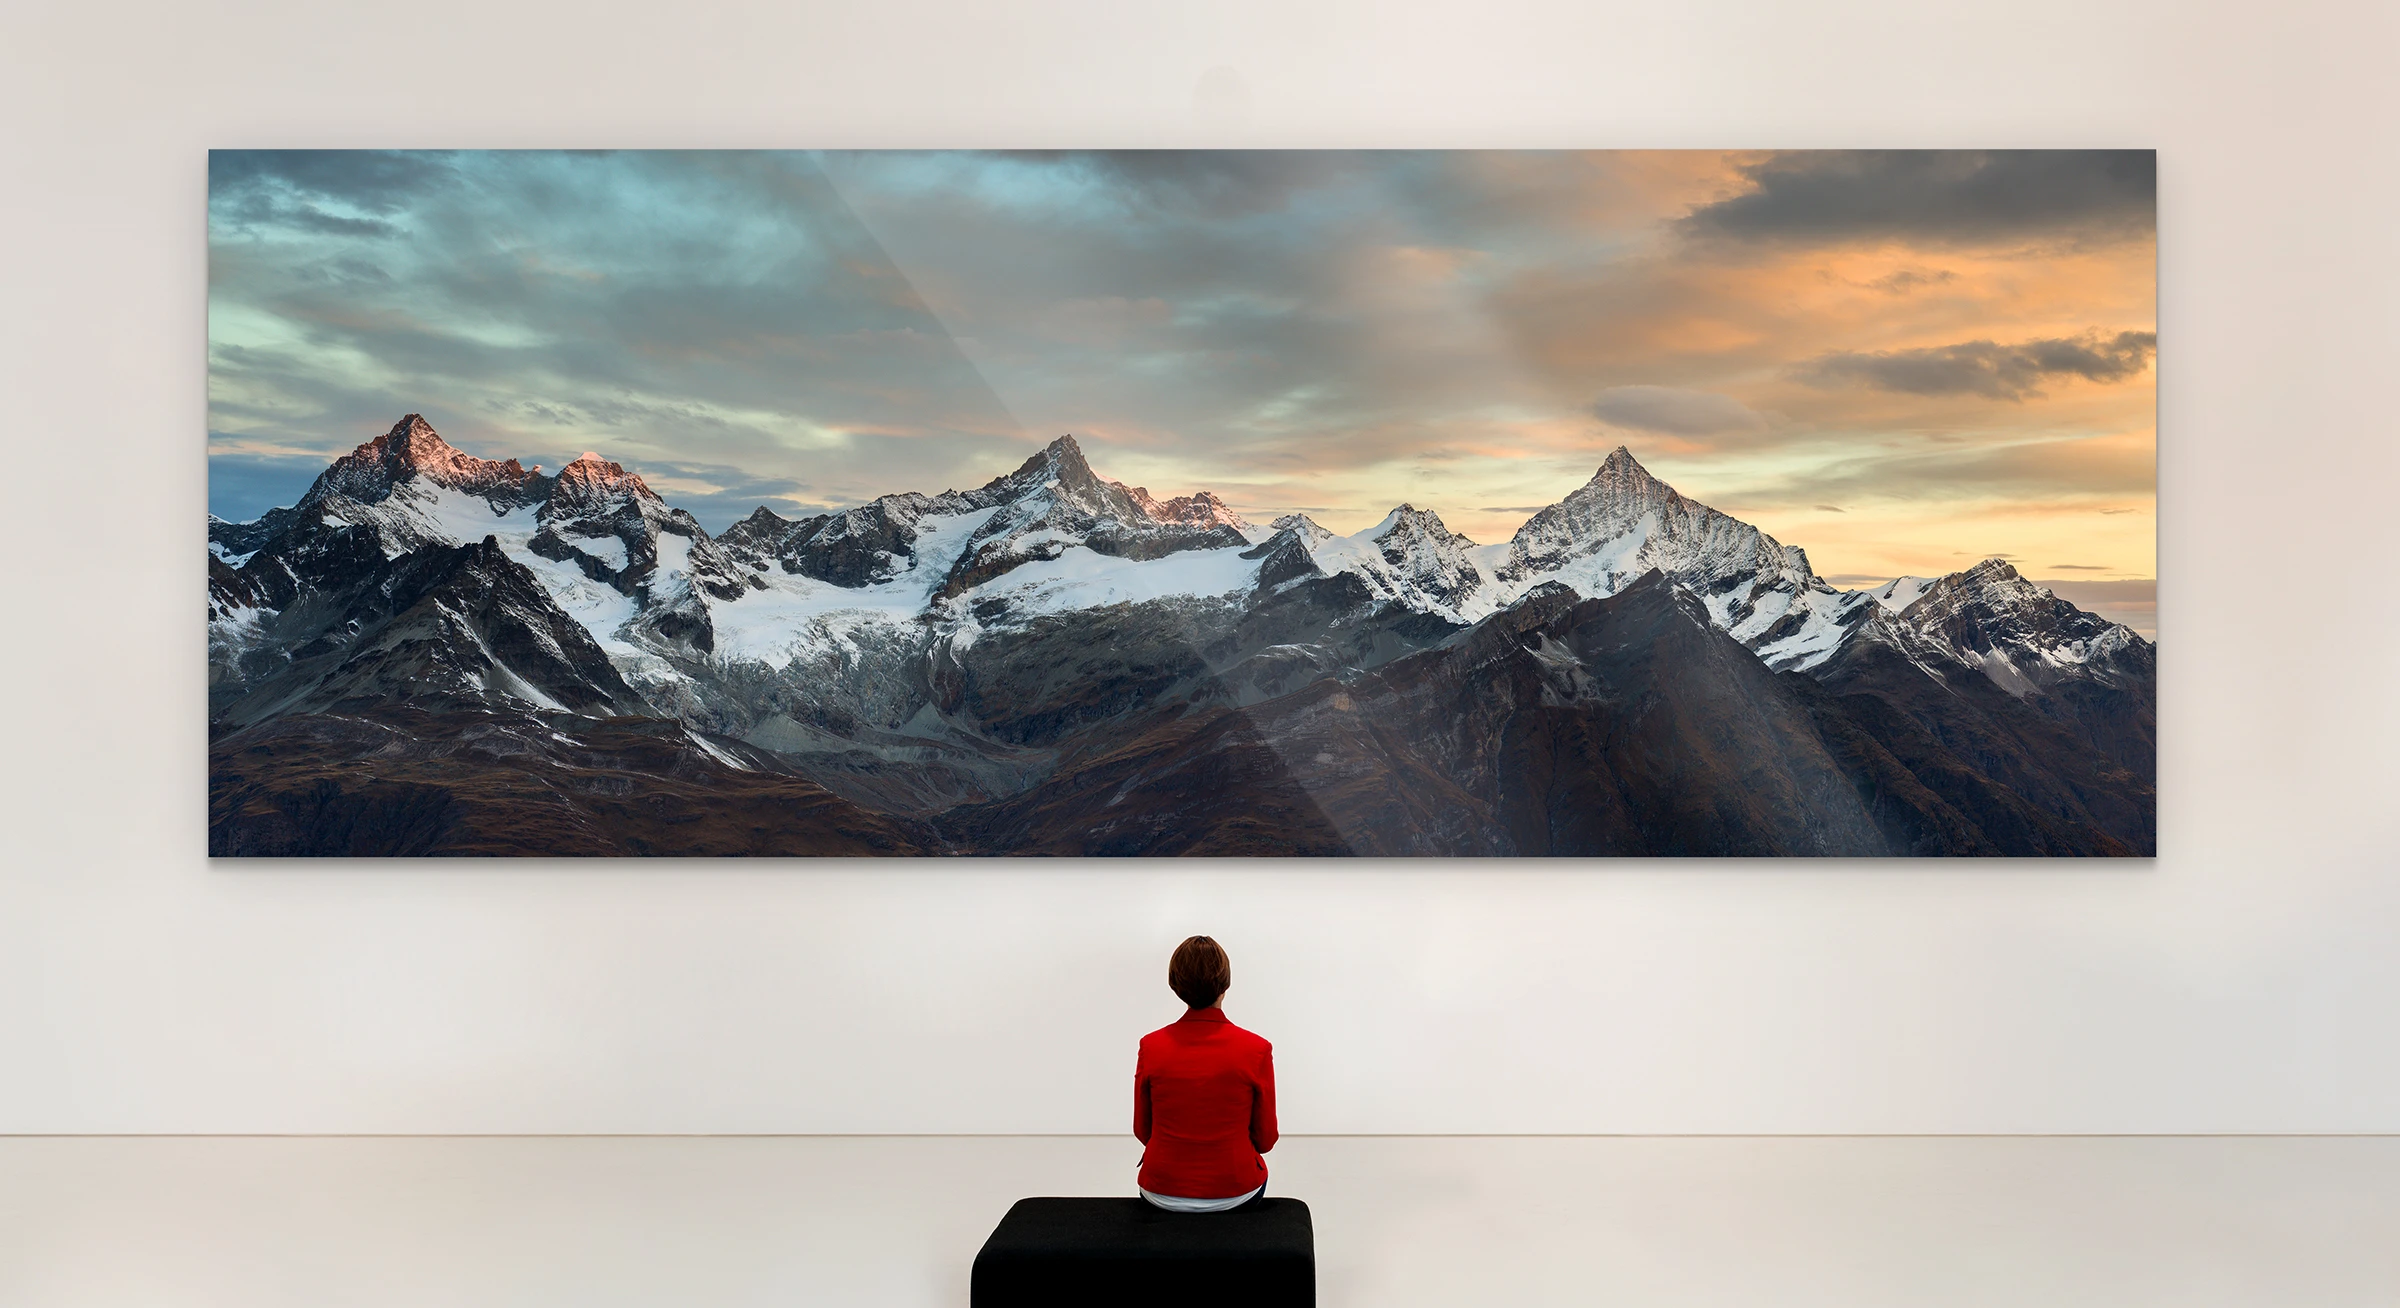 Mountain panorama photo as WhiteWall Masterprint hanging on a gallery wall.